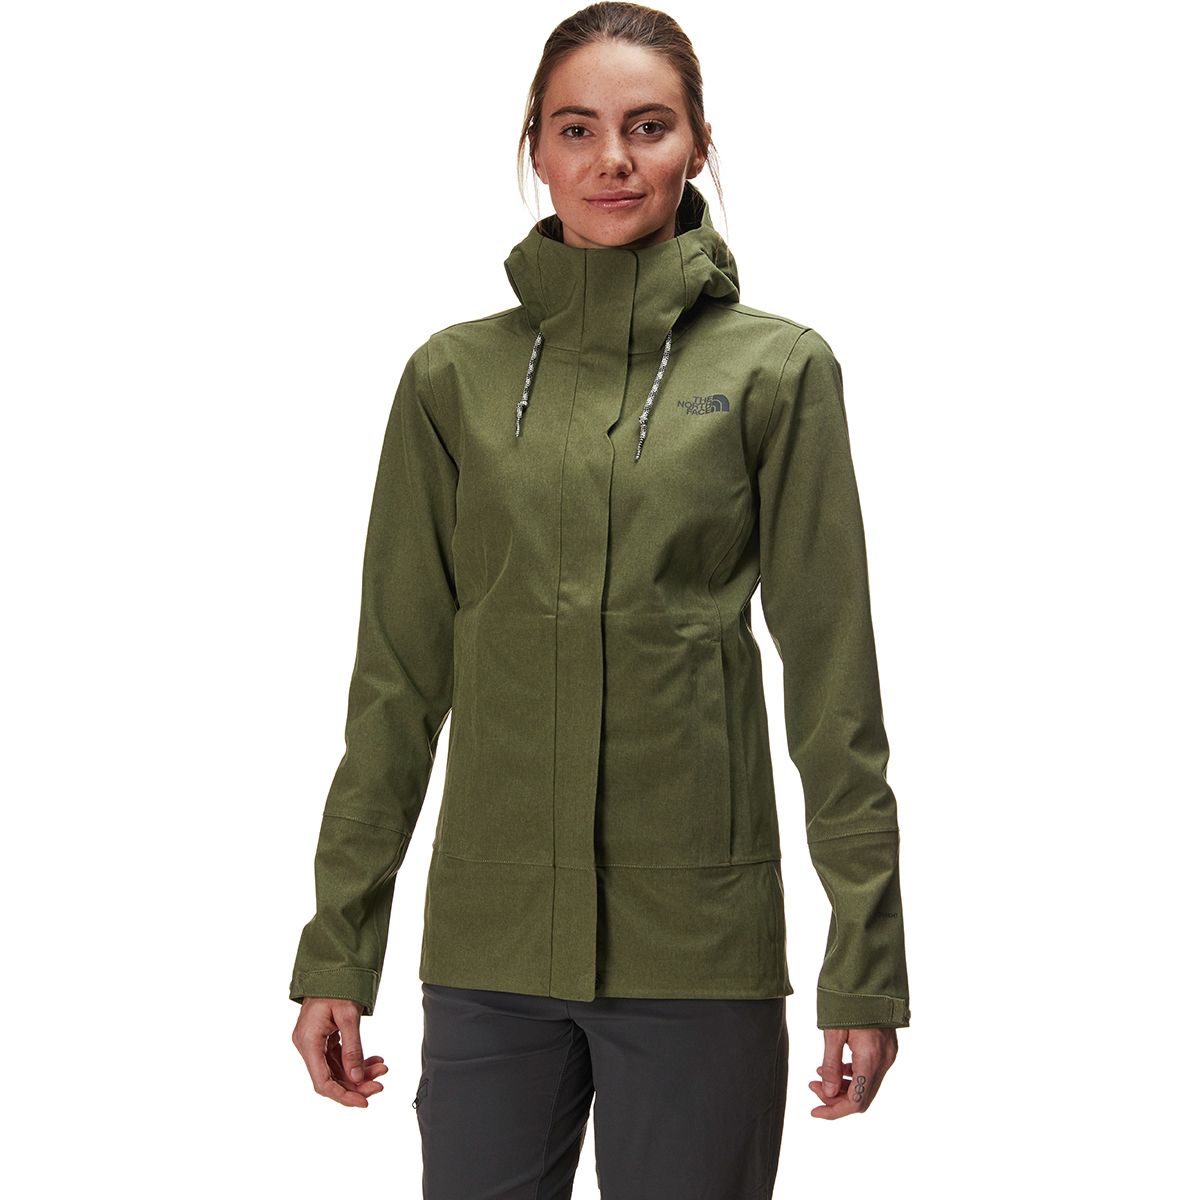 The North Face Apex Flex Dryvent Jacket 